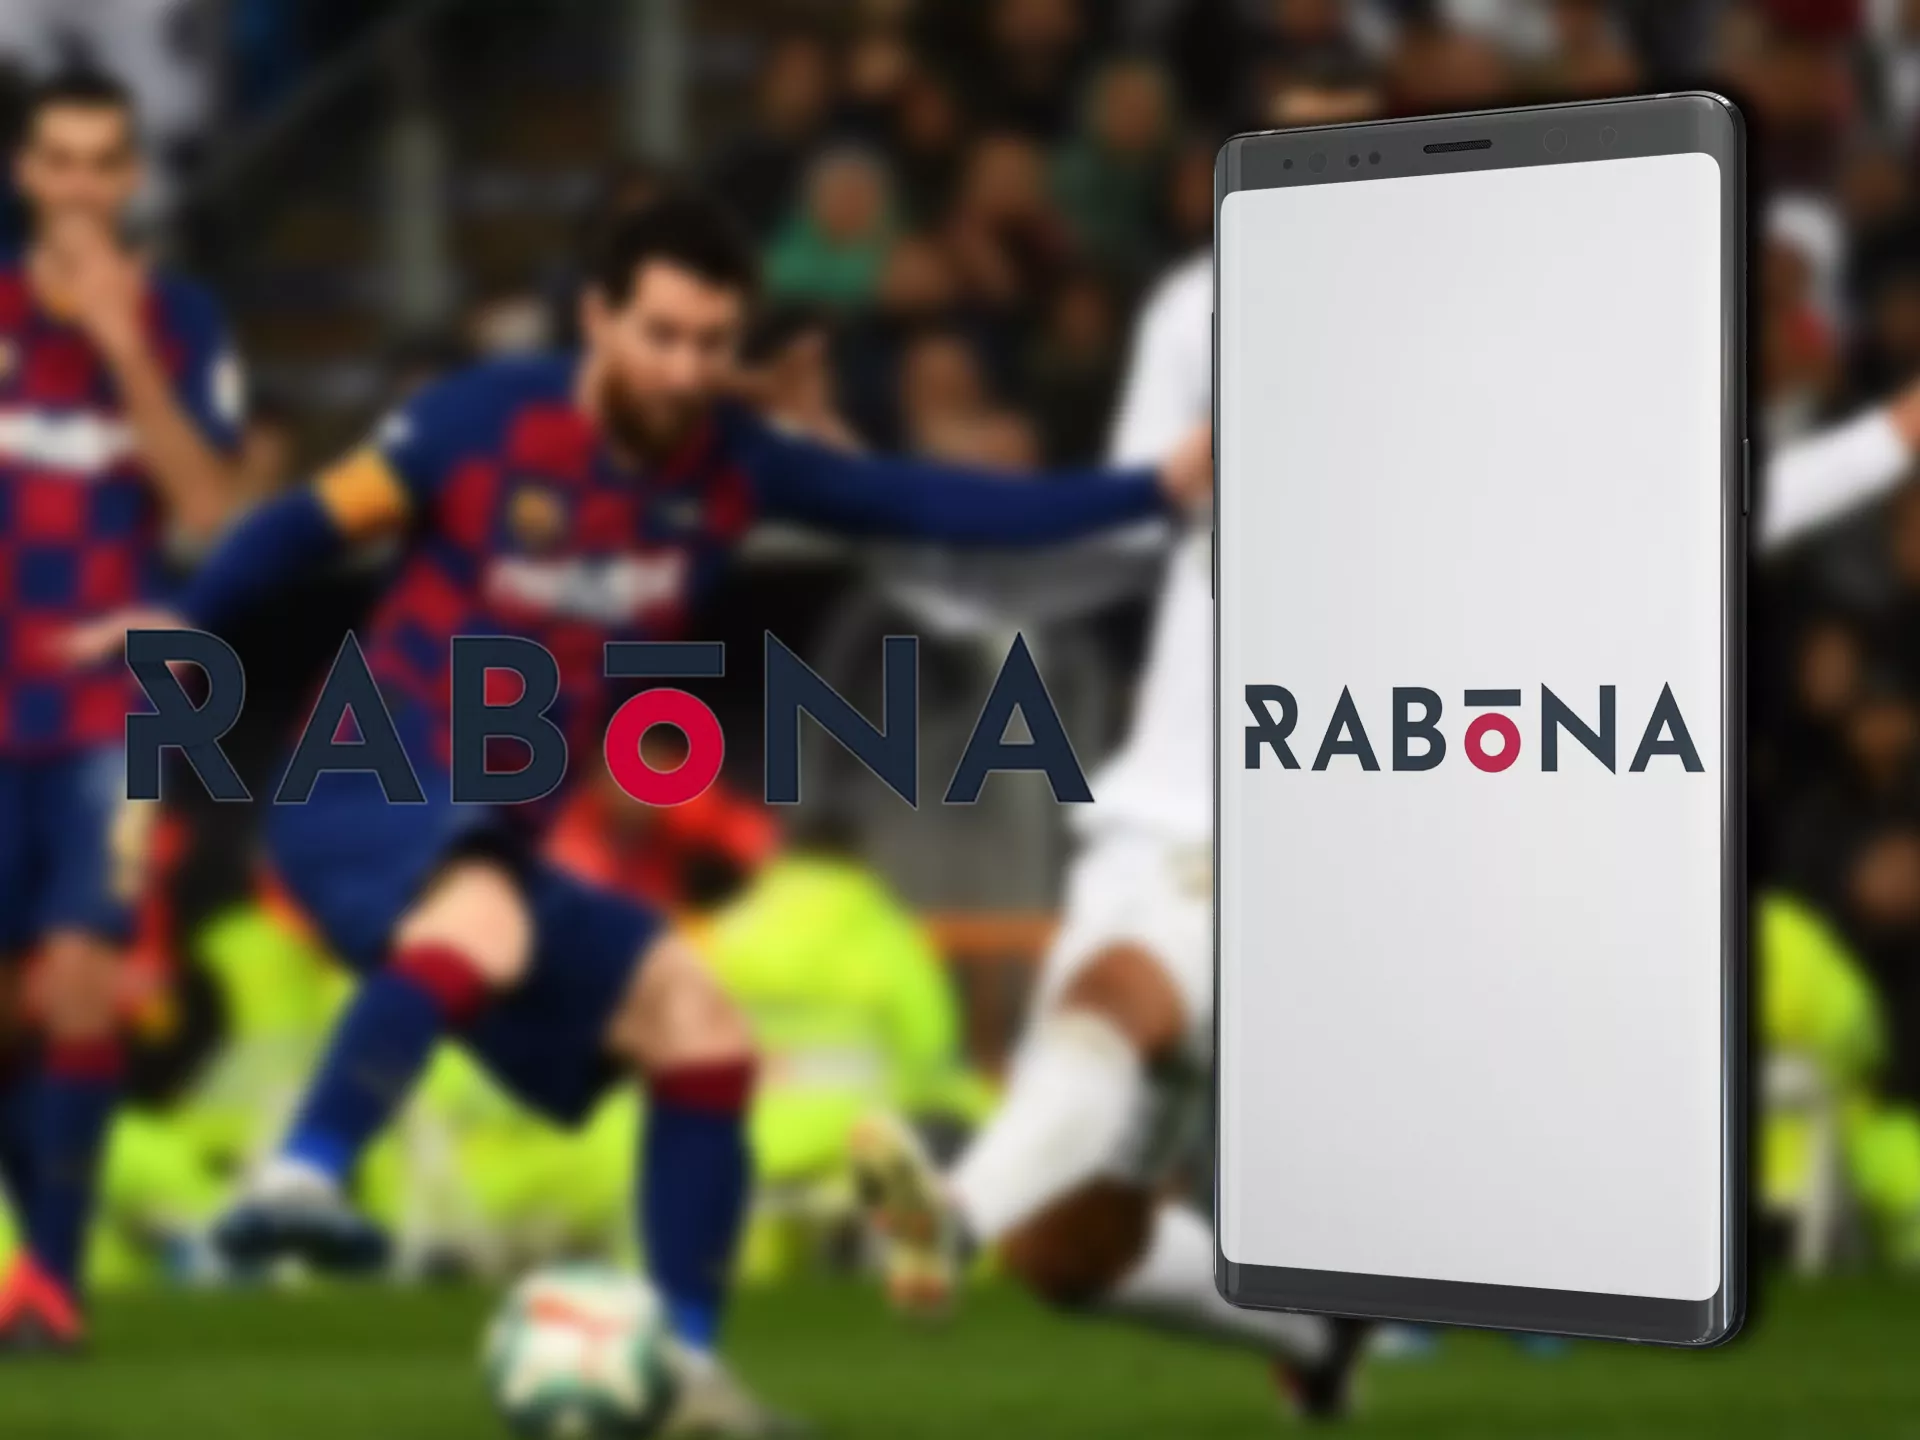 rabona is a best soccer betting company.